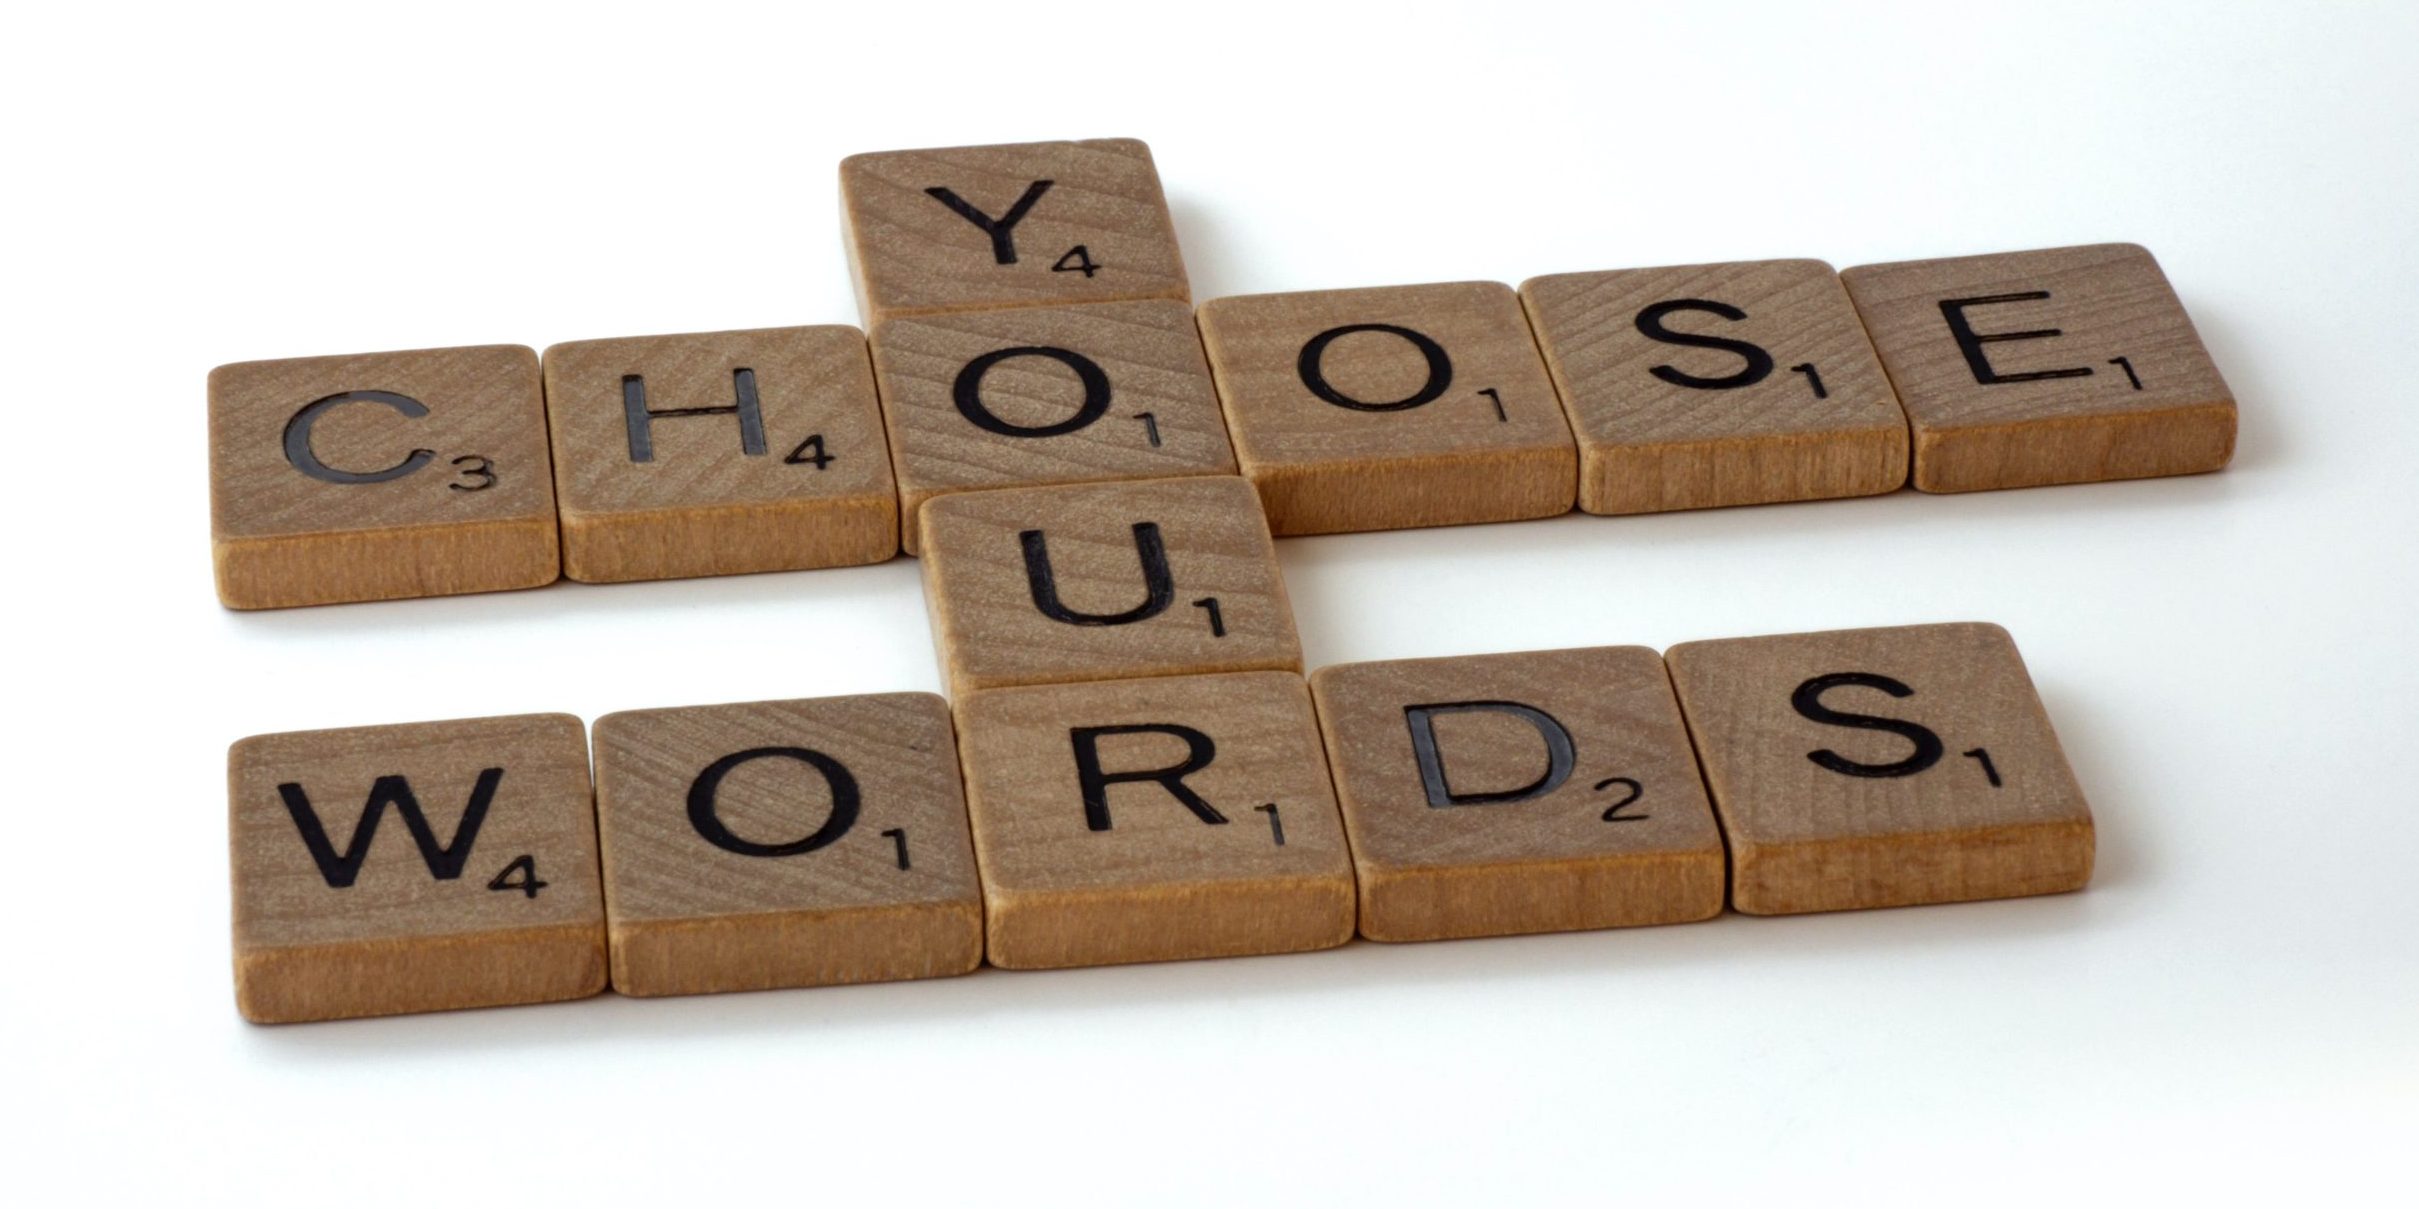 Image of scrabble tiles forming the words Choose Your Words to illustrate how language creates power